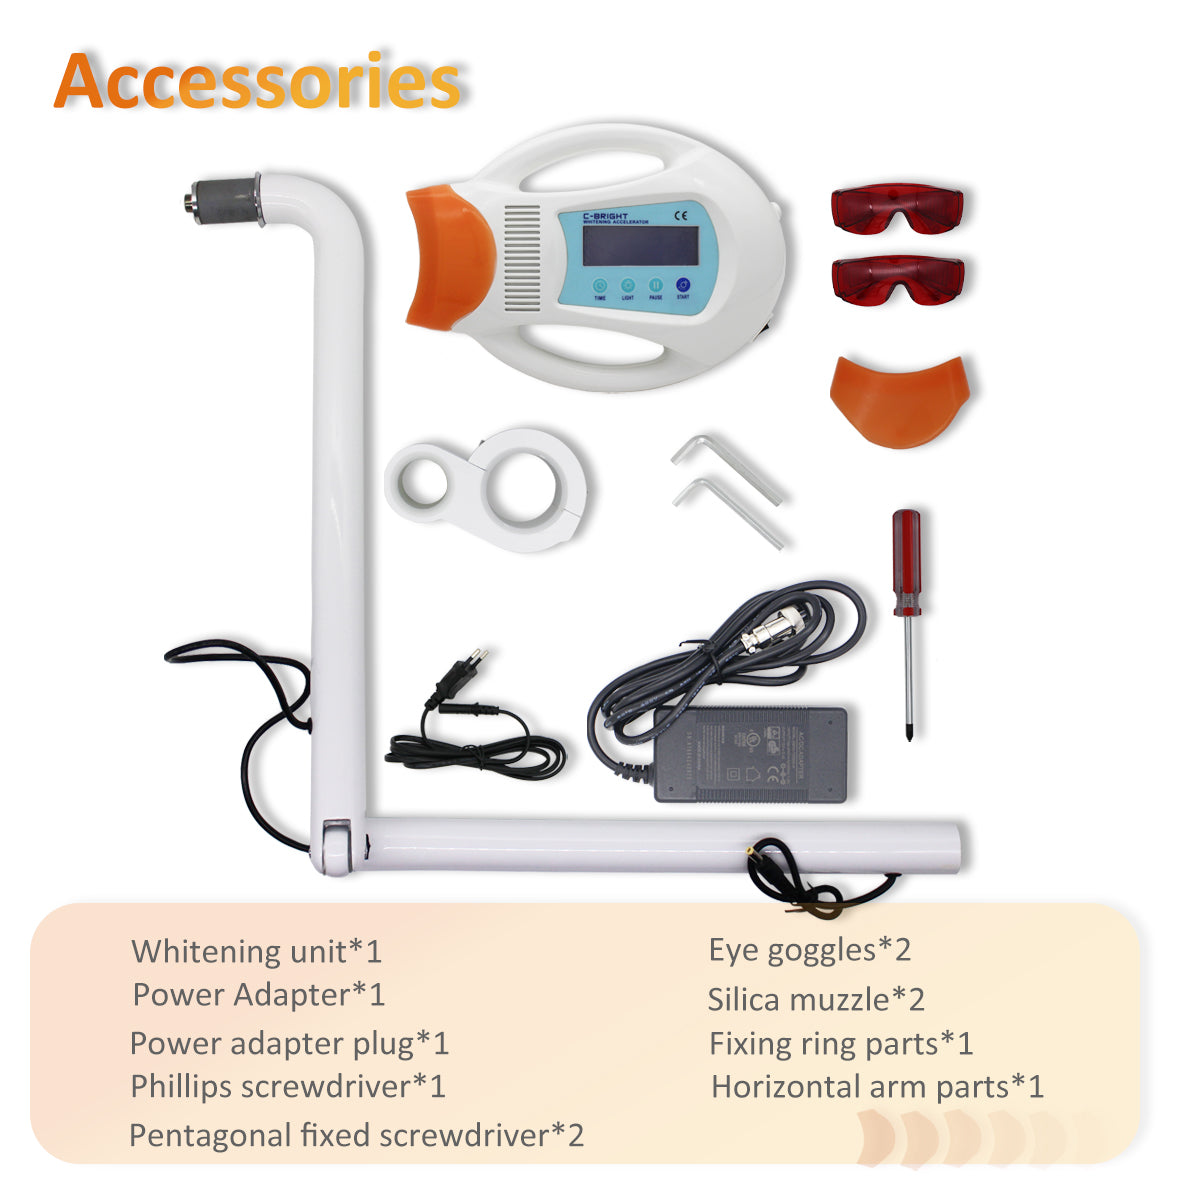 Genuine Dental LED Teeth Whitening Lamp Horizontal ArmTooth Cold Light Professional Machine With 2pcs Goggles